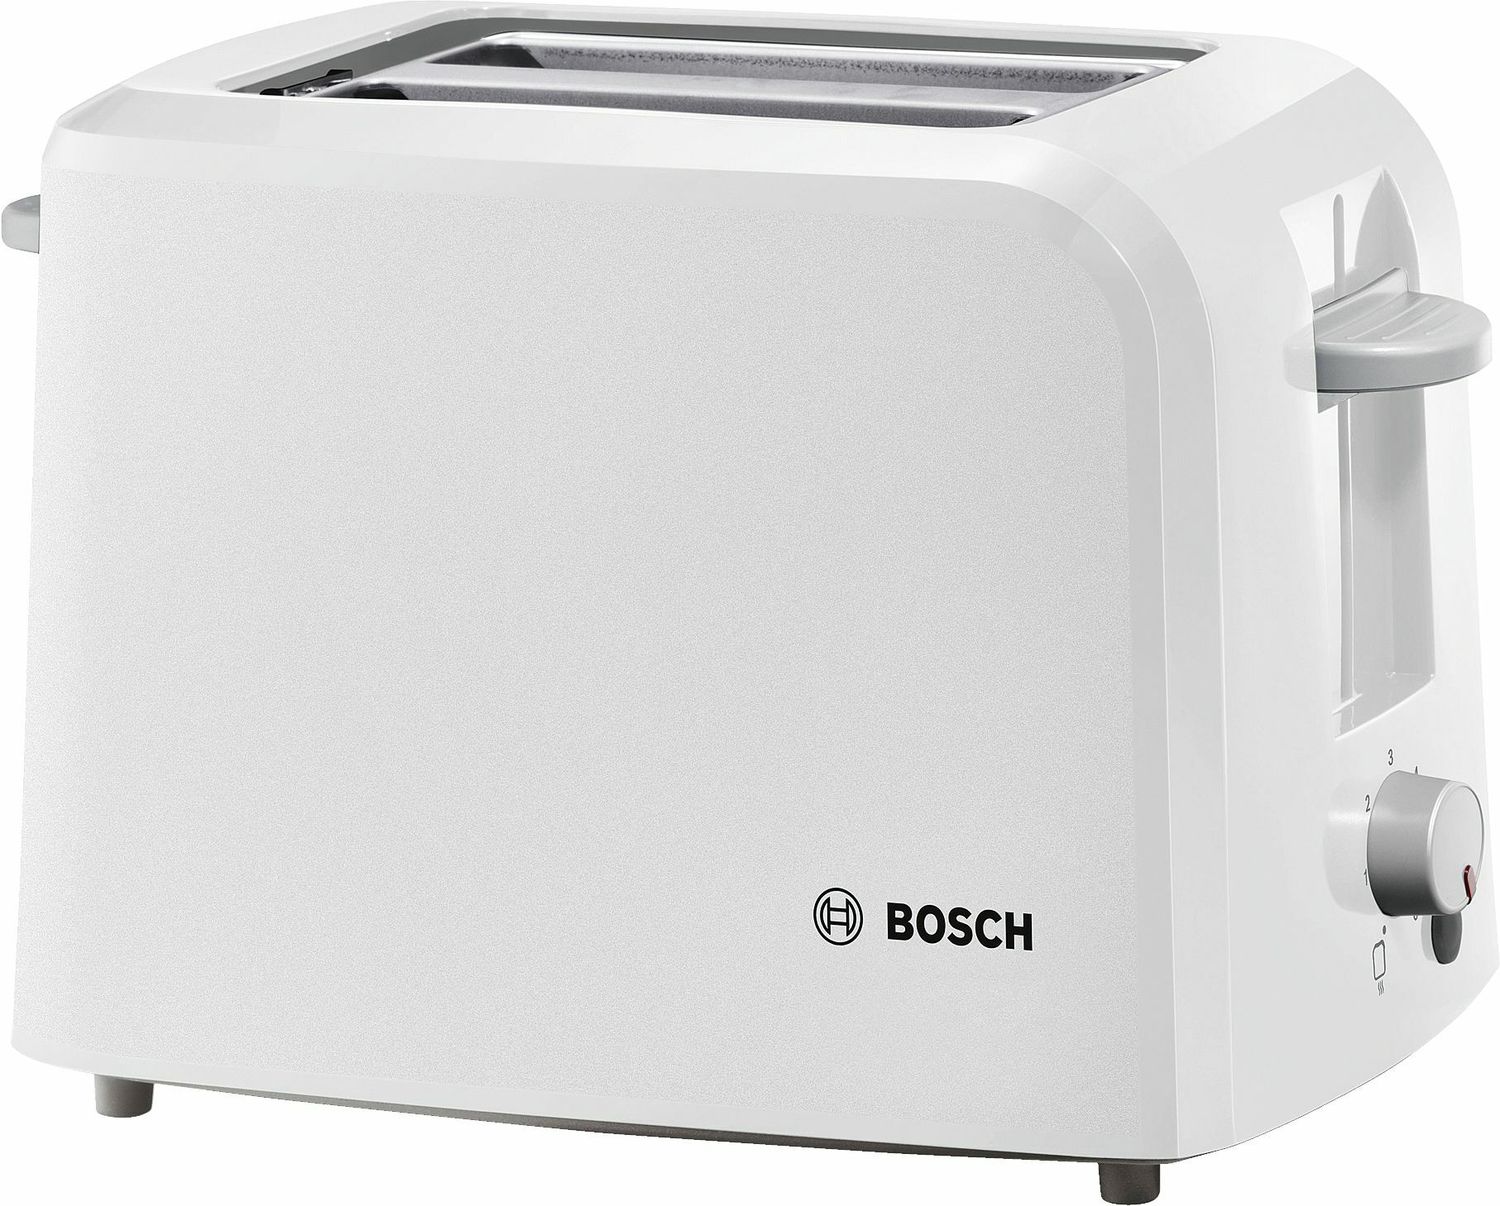 BOSCH TAT3A011GB Compact Toaster, white